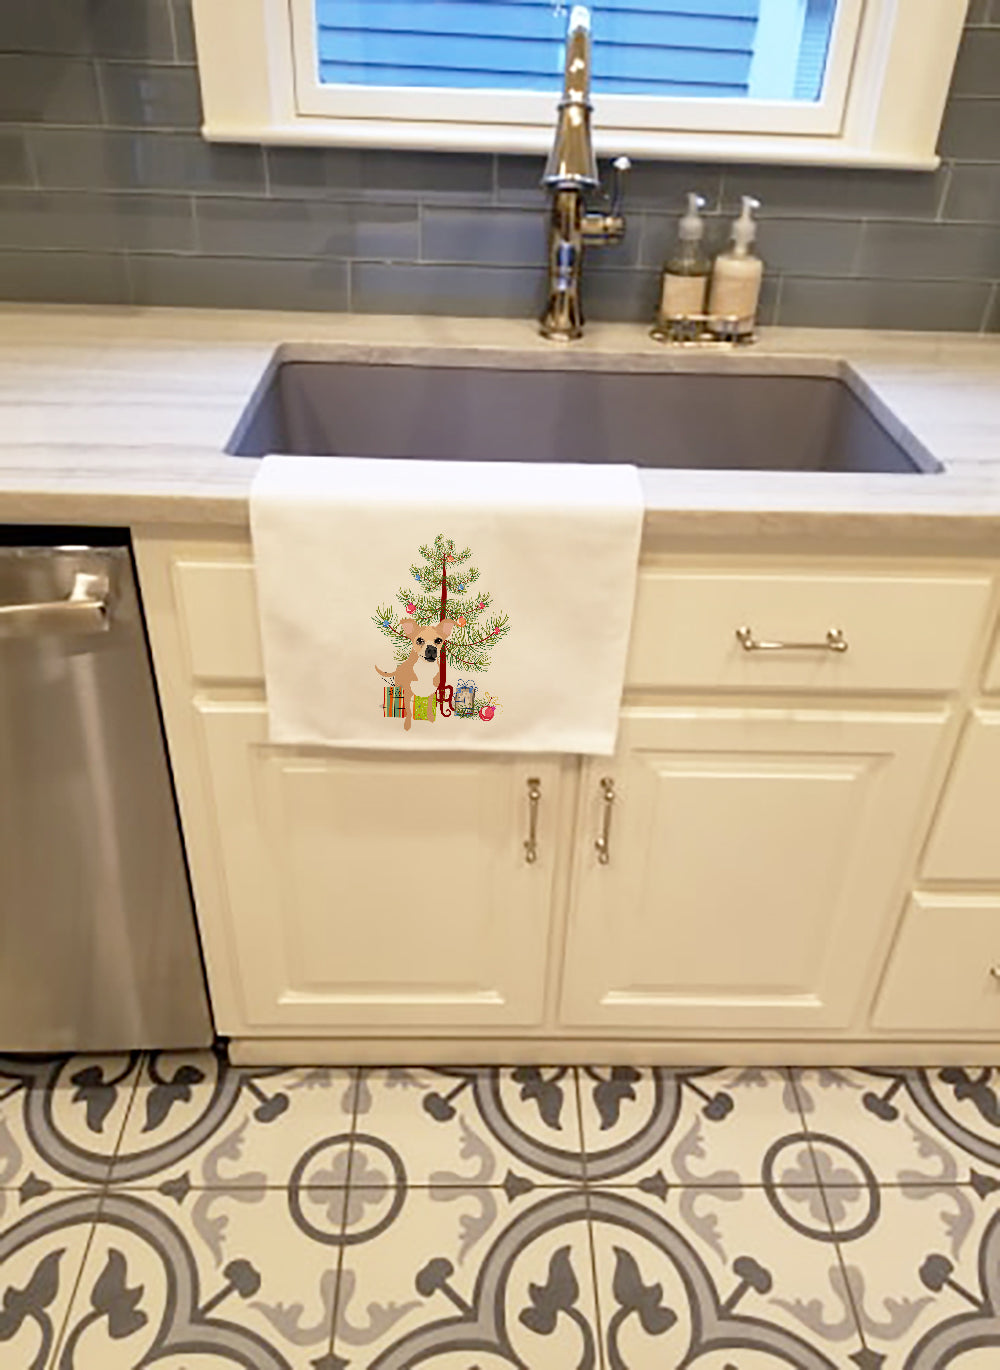 Buy this Chihuahua Gold and White Christmas White Kitchen Towel Set of 2